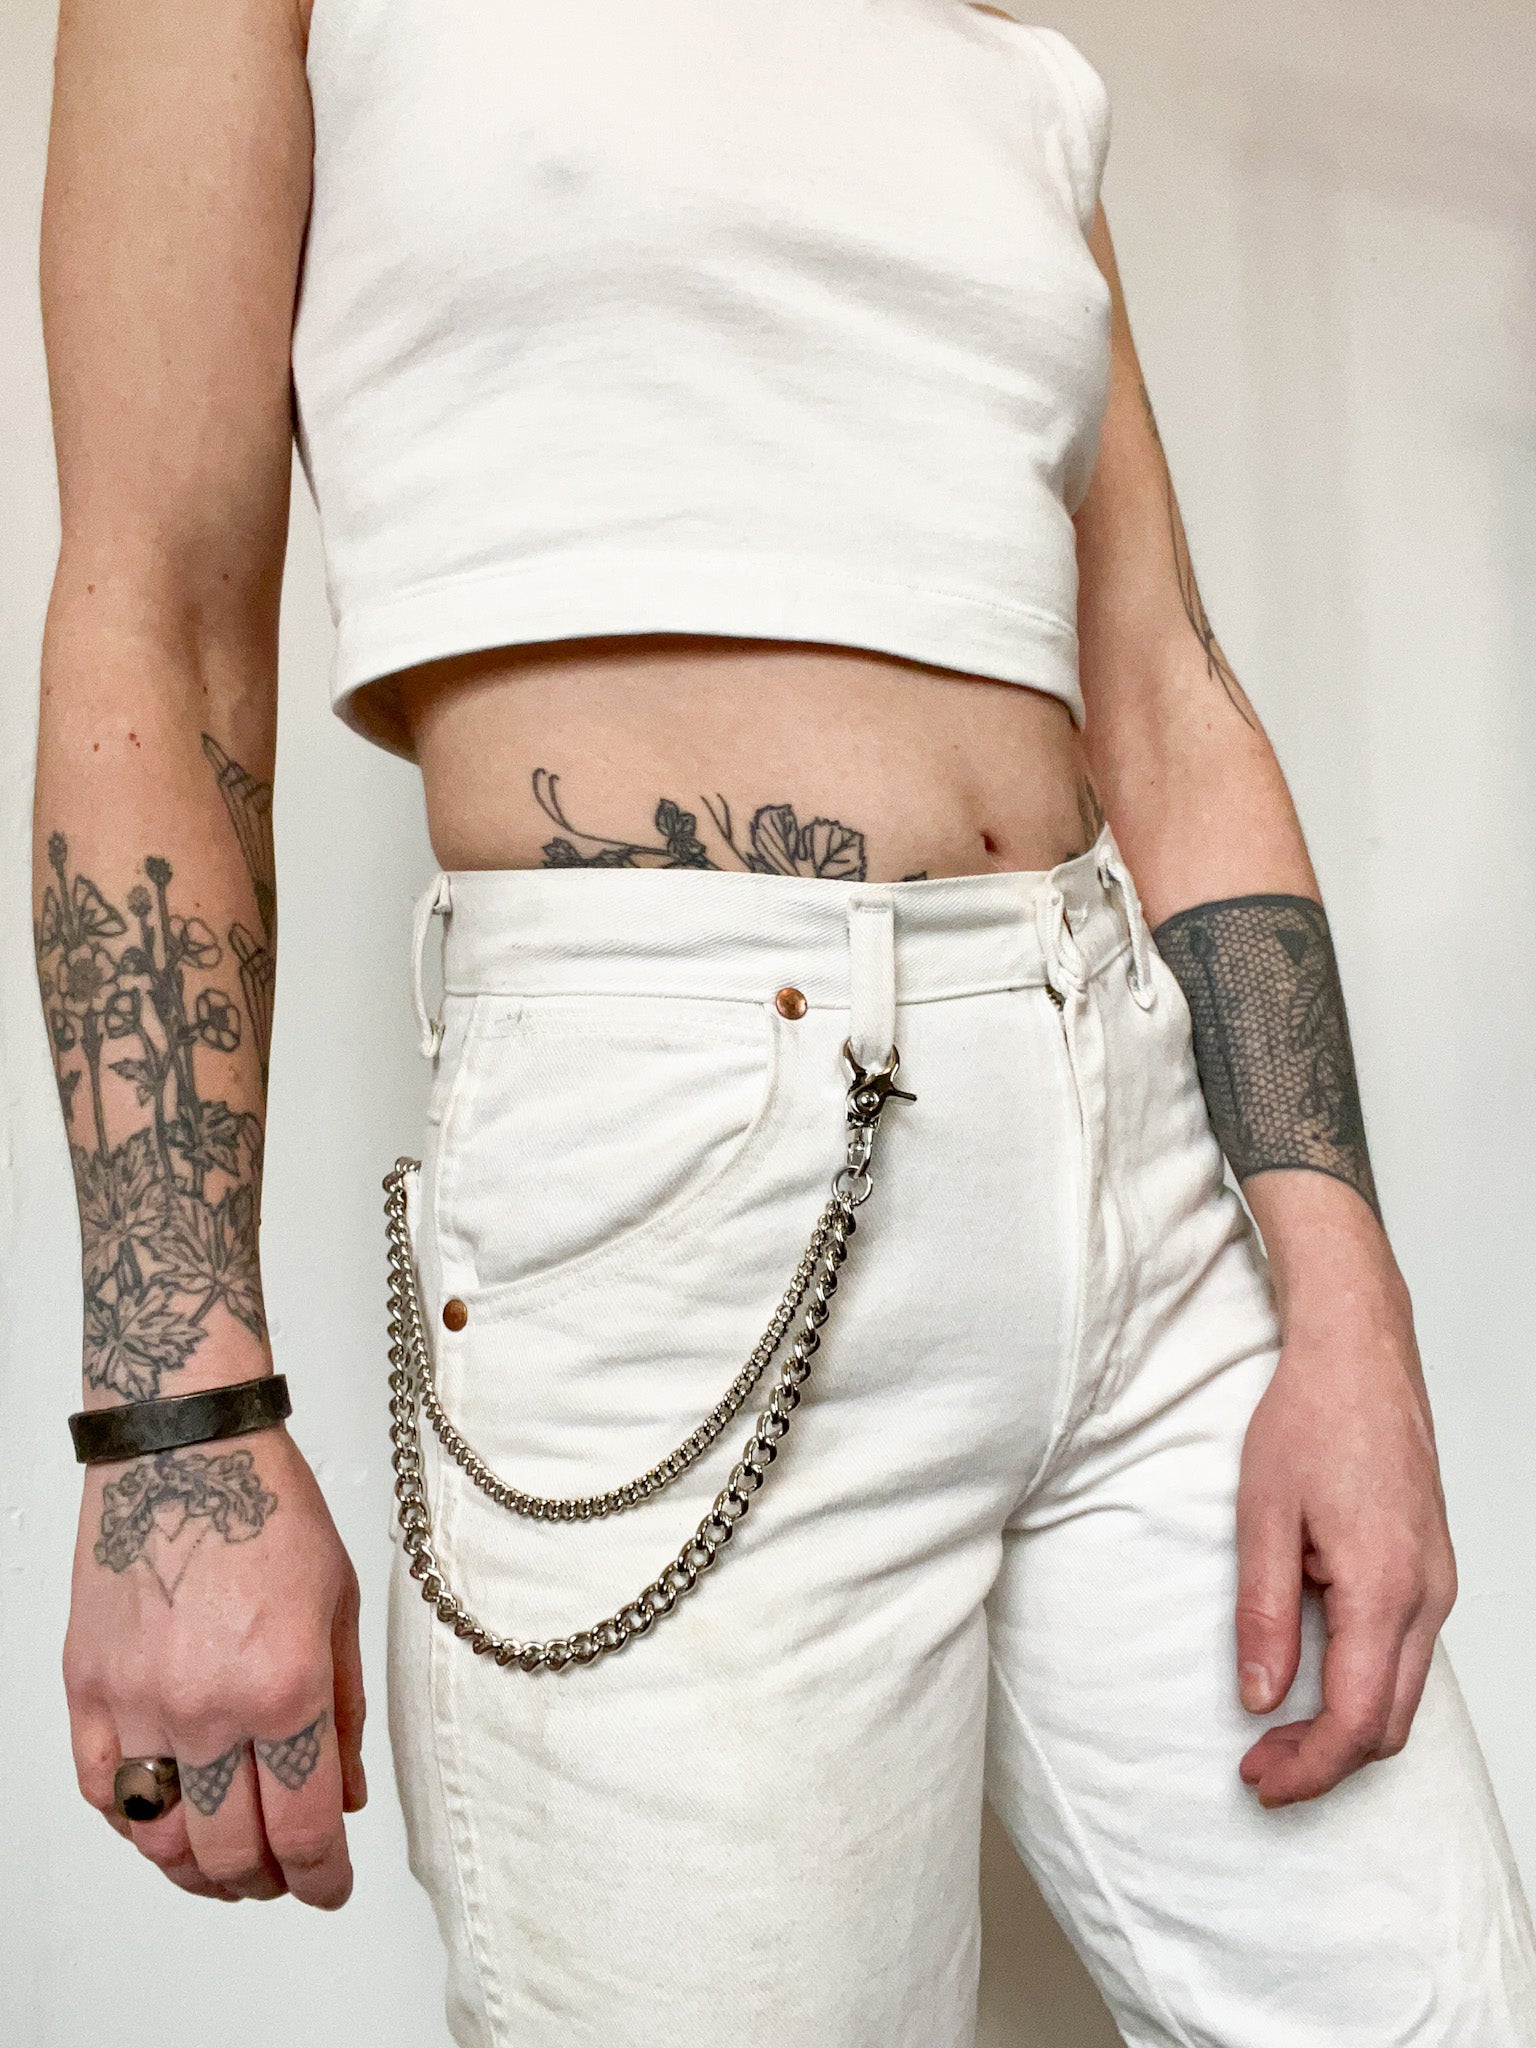 Tattooed person stands with hands at sides wearing an all white outfit and an agate chain in stainless steel. The agate chain is a double wallet chain with one larger curb chain of 1/4" and a small curb chain of 3/8"